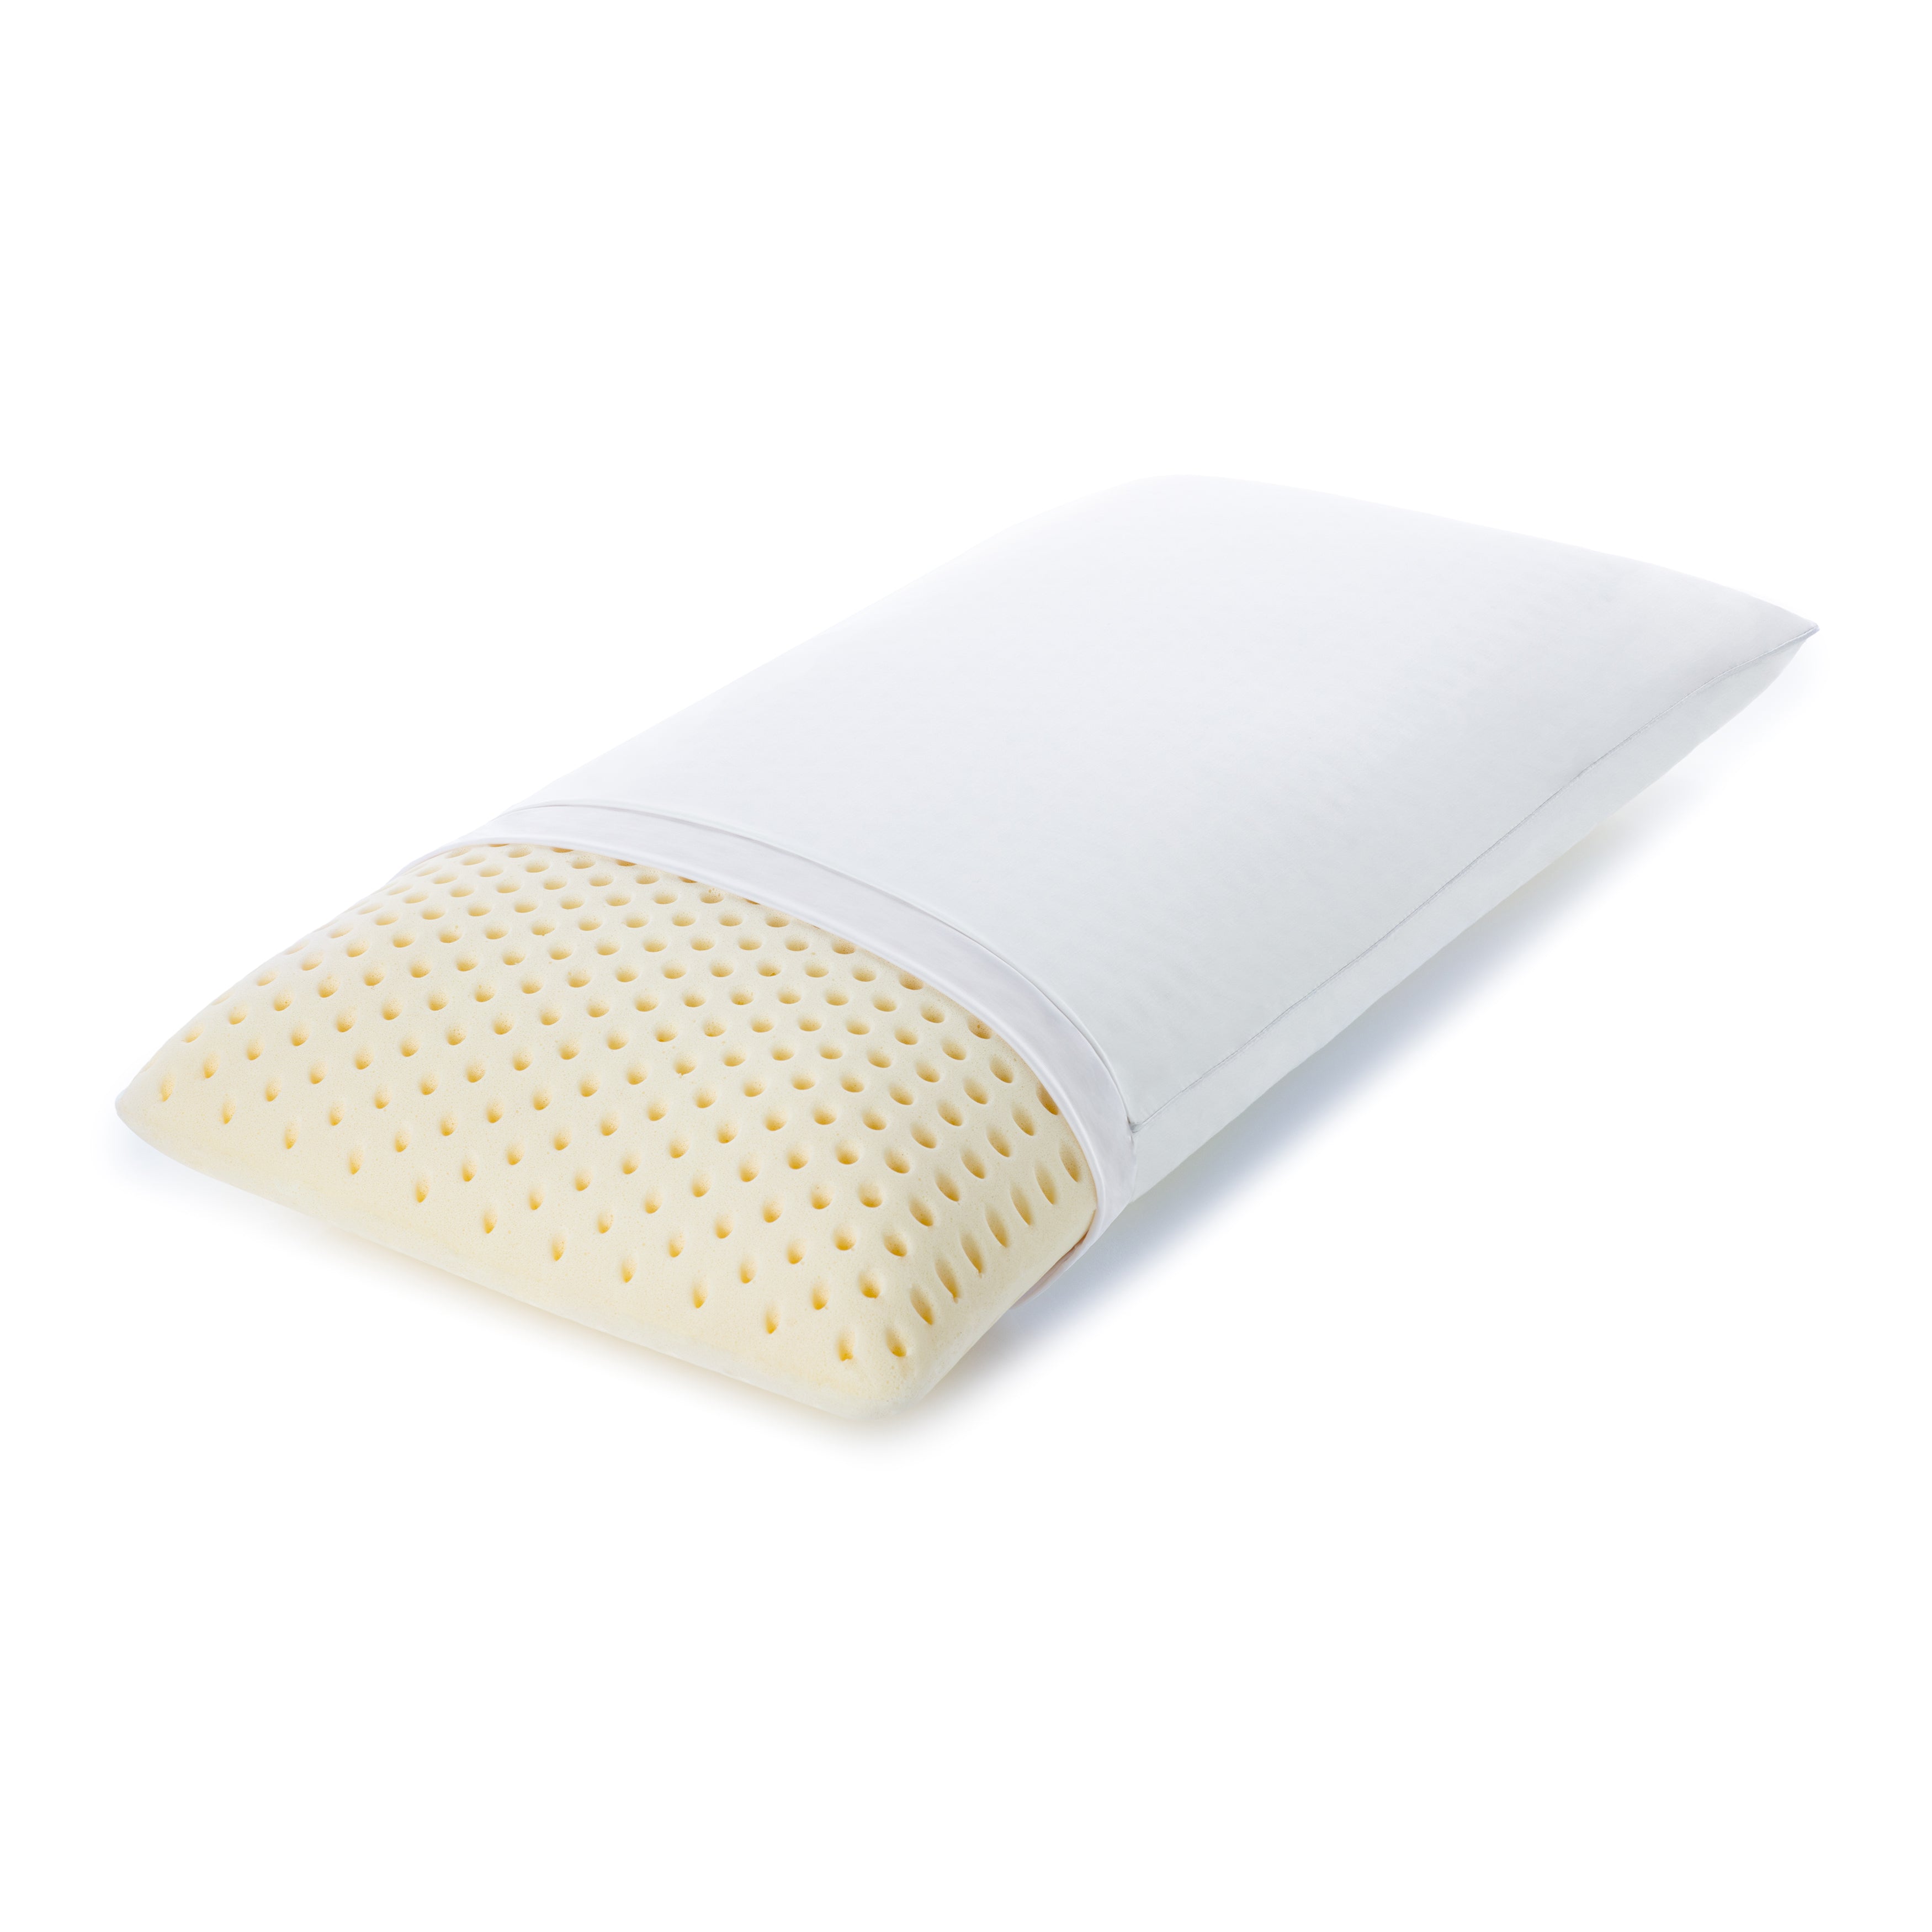 Latex Bed Pillow - Talalay Low Profile - Durable, Contouring, Soft 100% Natural Latex with Soothing Properties. Relieve Pressure - Aches & Pains Melt Away, Linner and Cover Standard